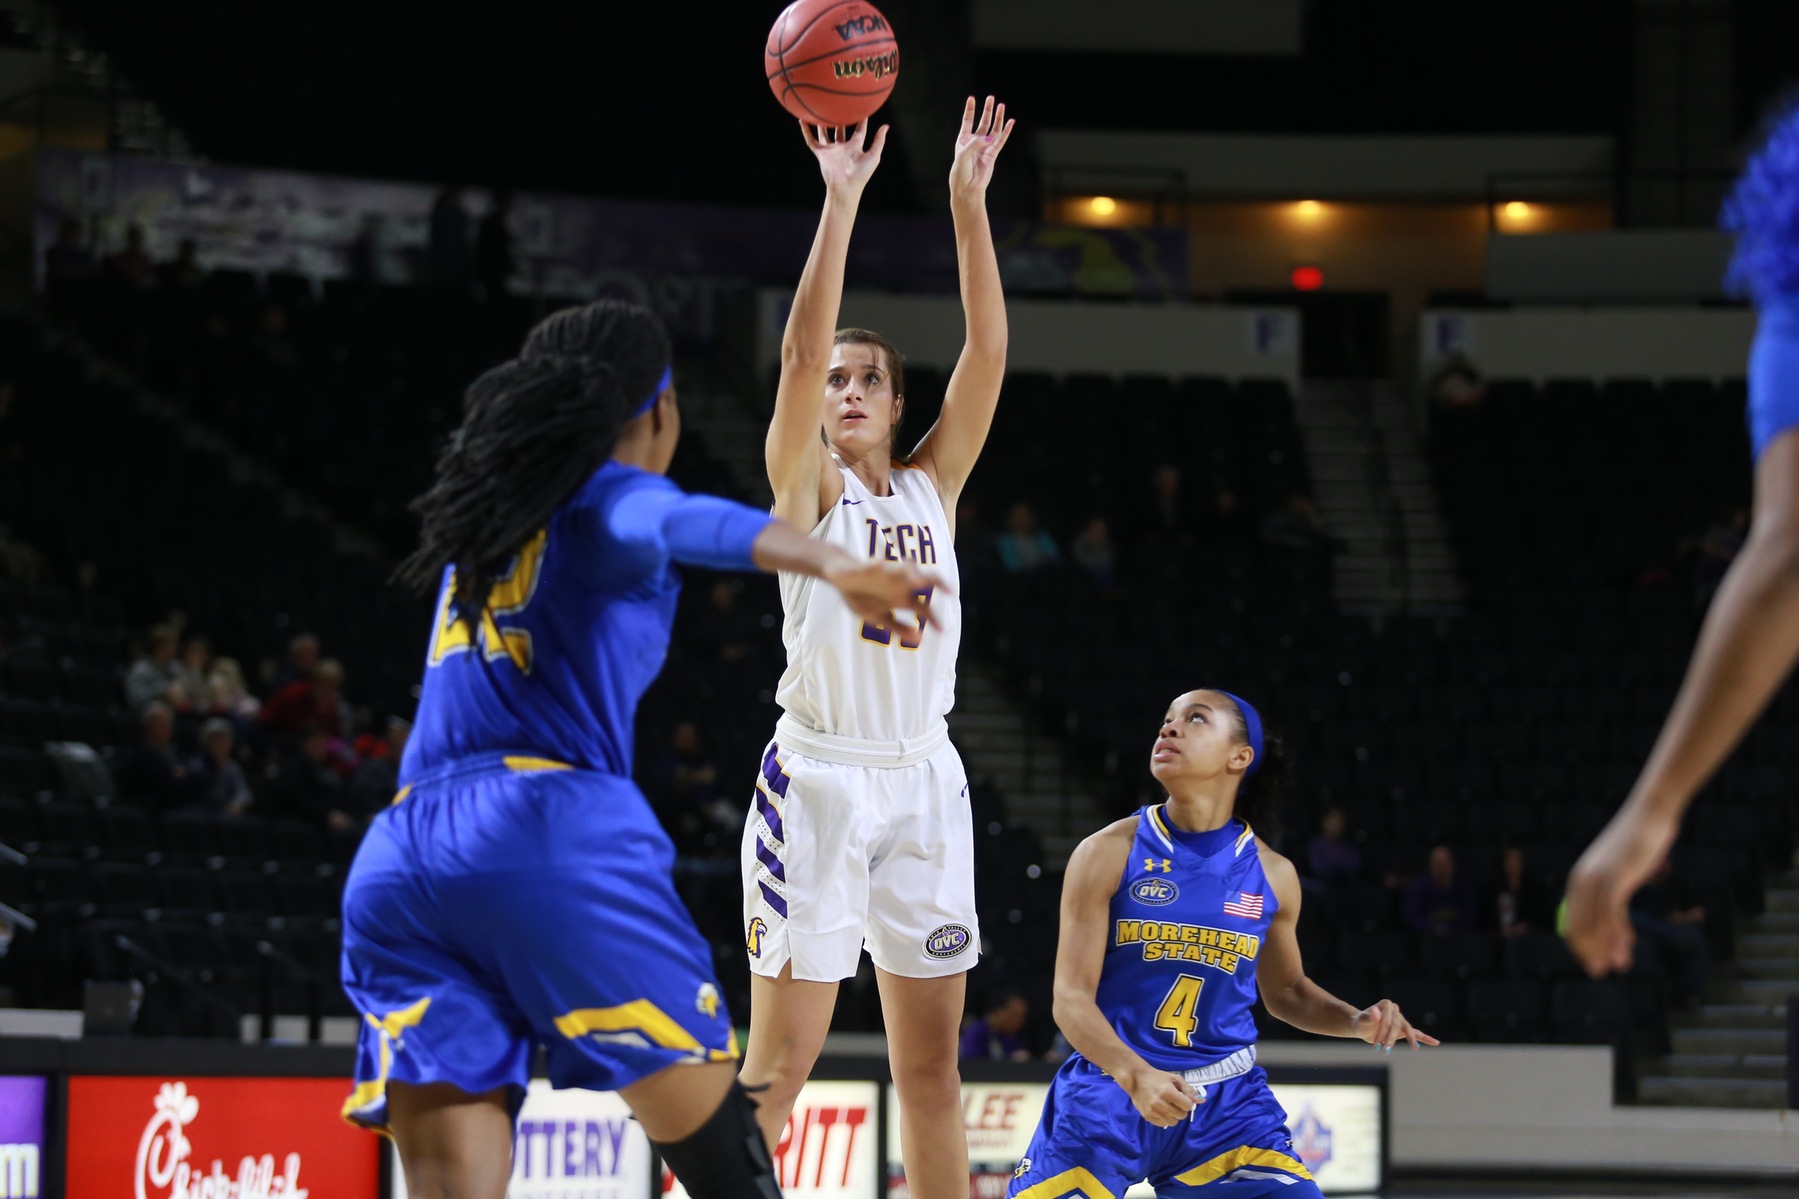 Tech shows promise in first OVC game versus Morehead State